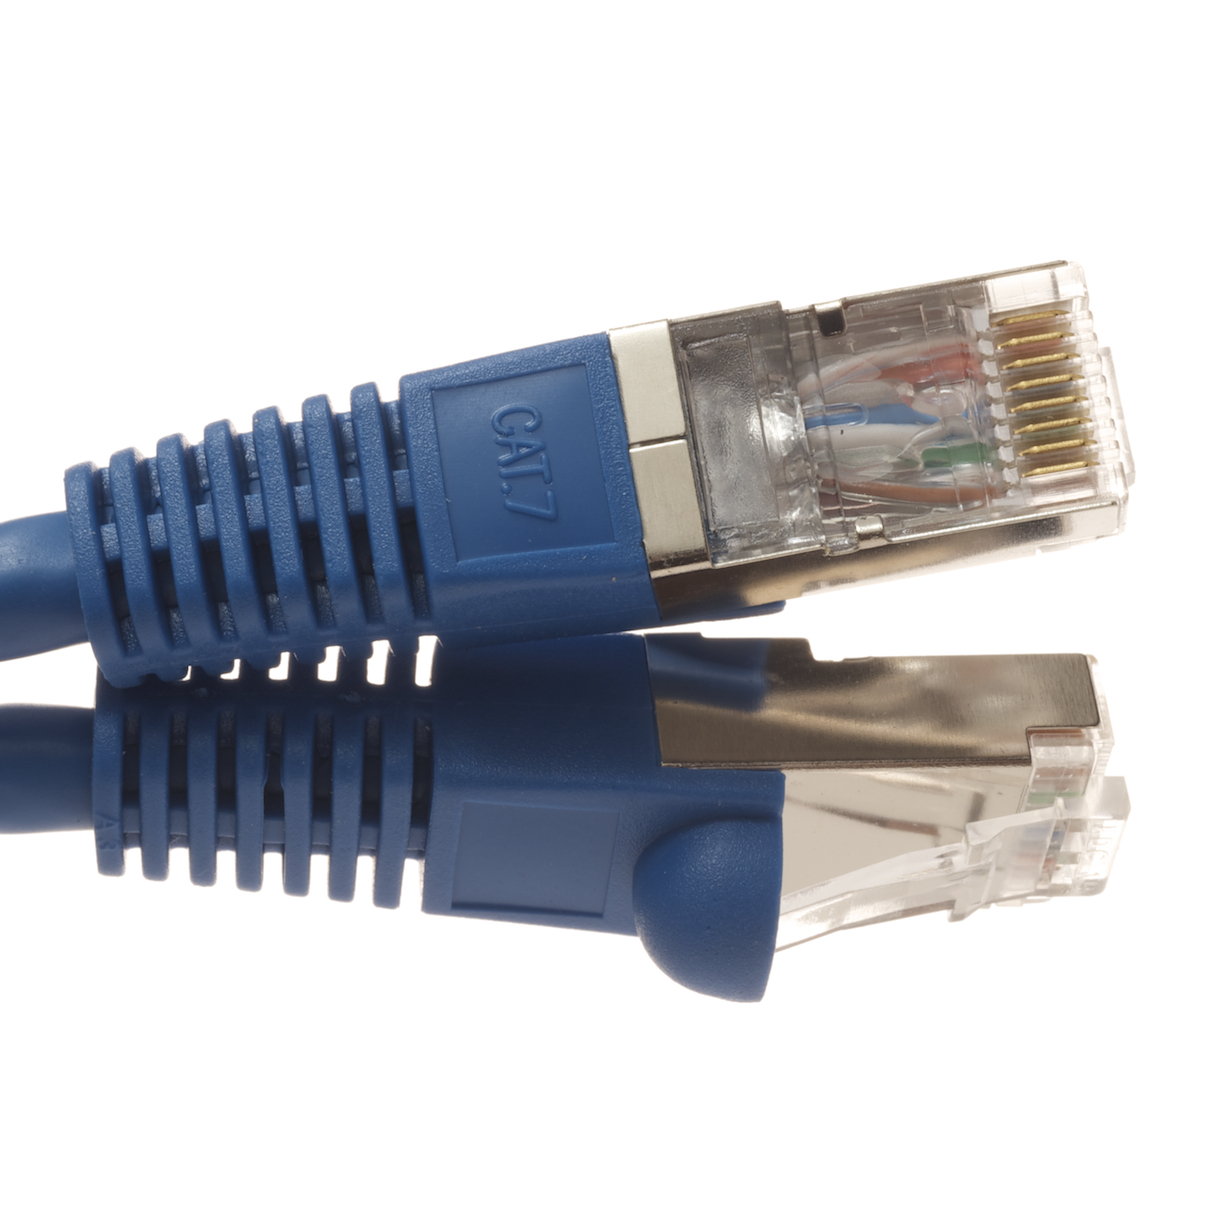 Cat7 Ethernet Cables in Blue